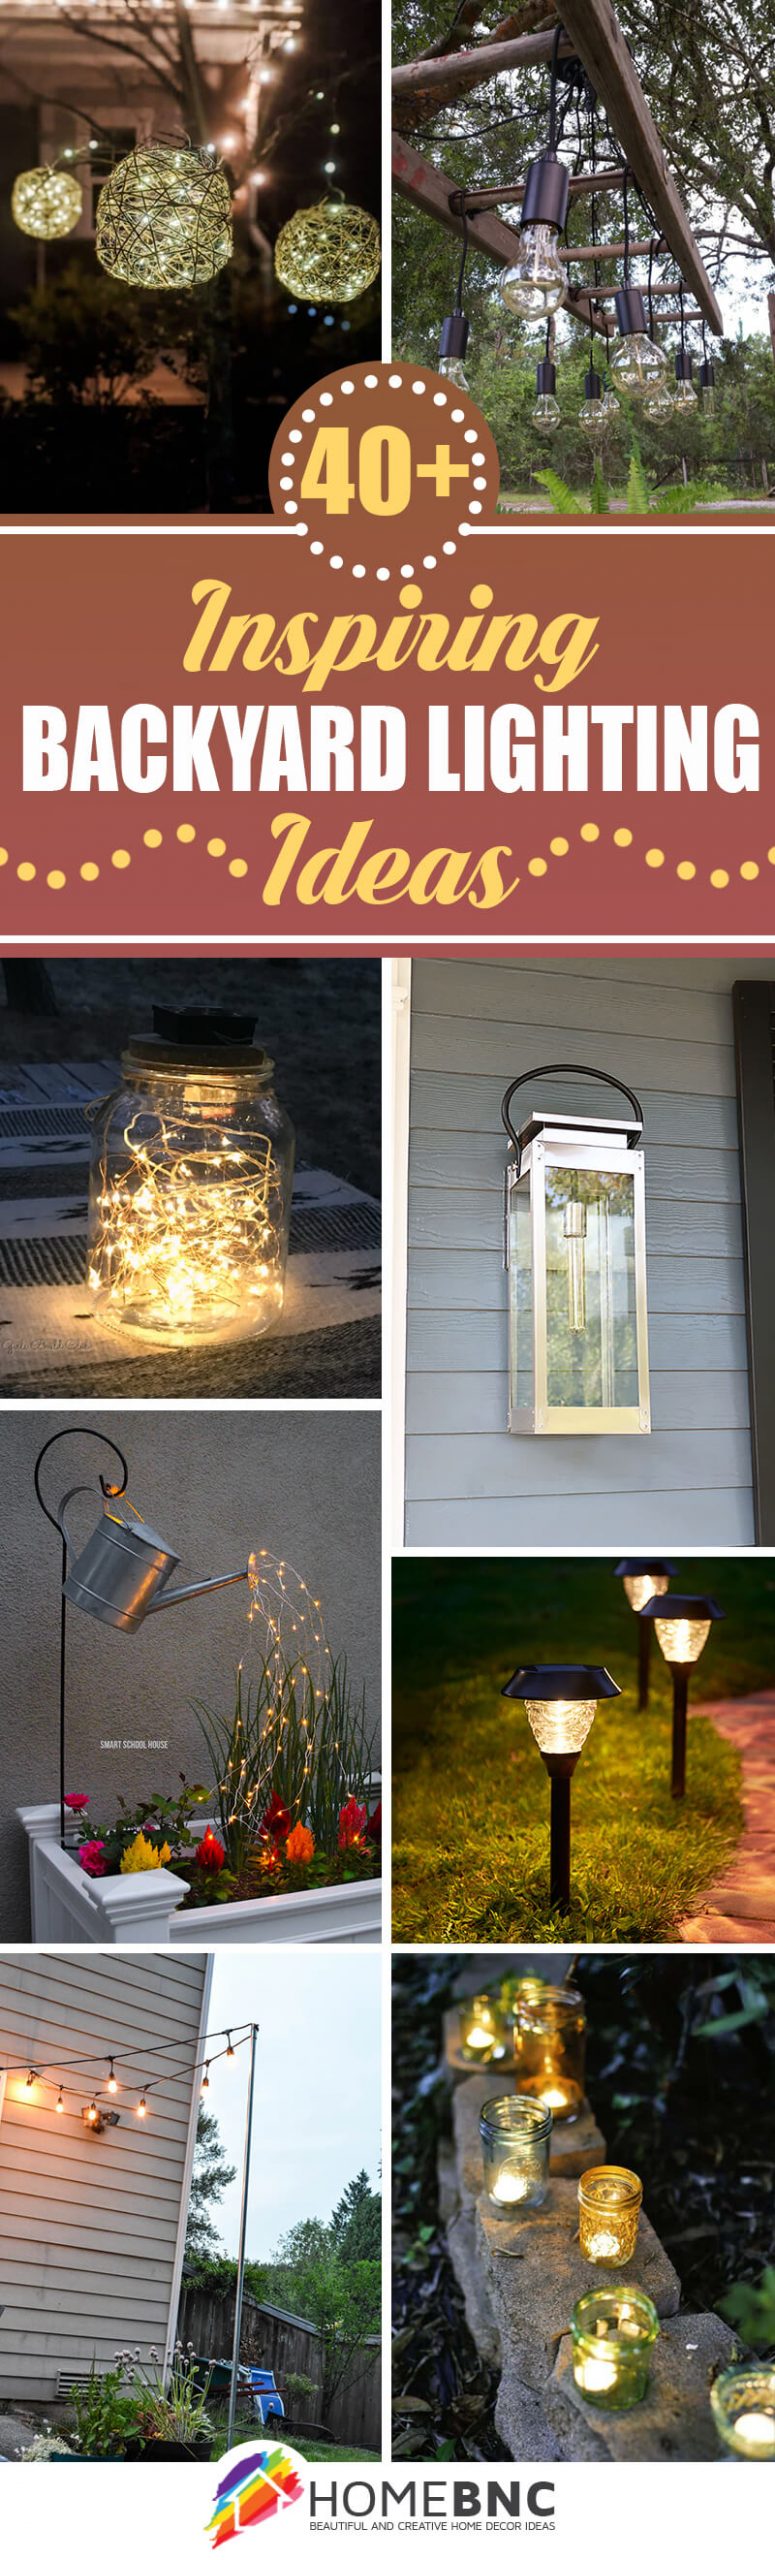 40 Best Backyard Lighting Ideas And, Lighted Yard Decorations For Summer House